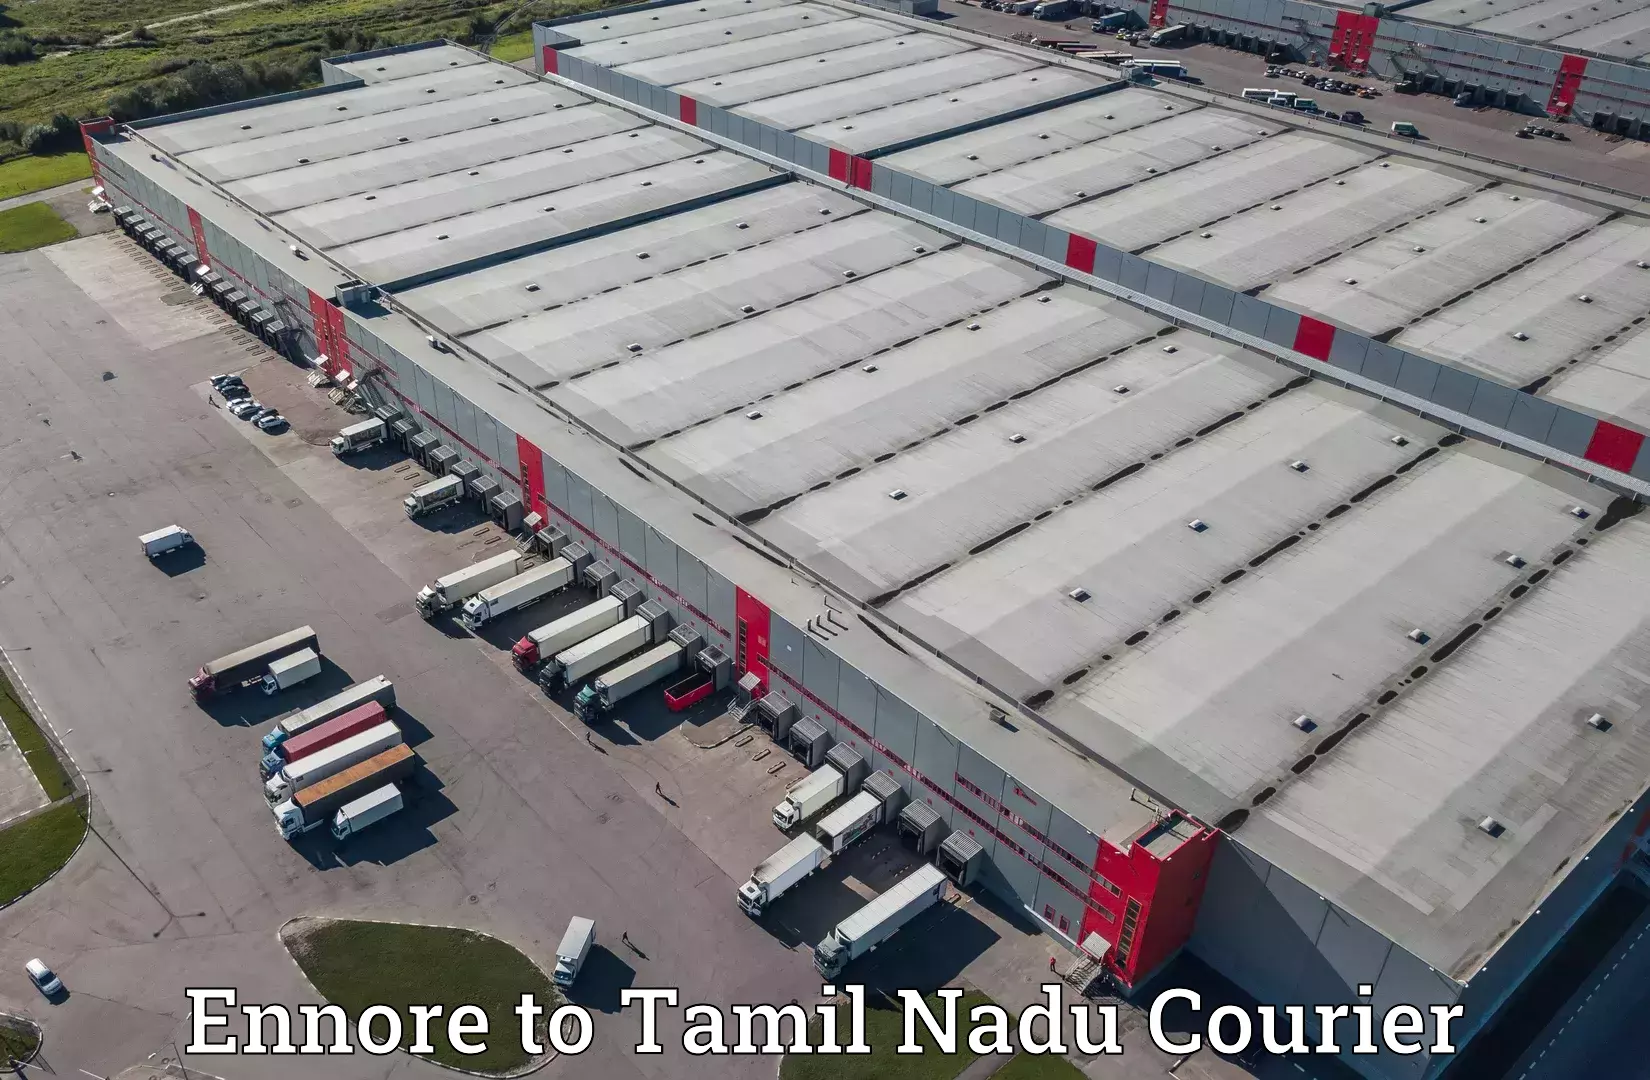 Courier service partnerships Ennore to Chennai Port